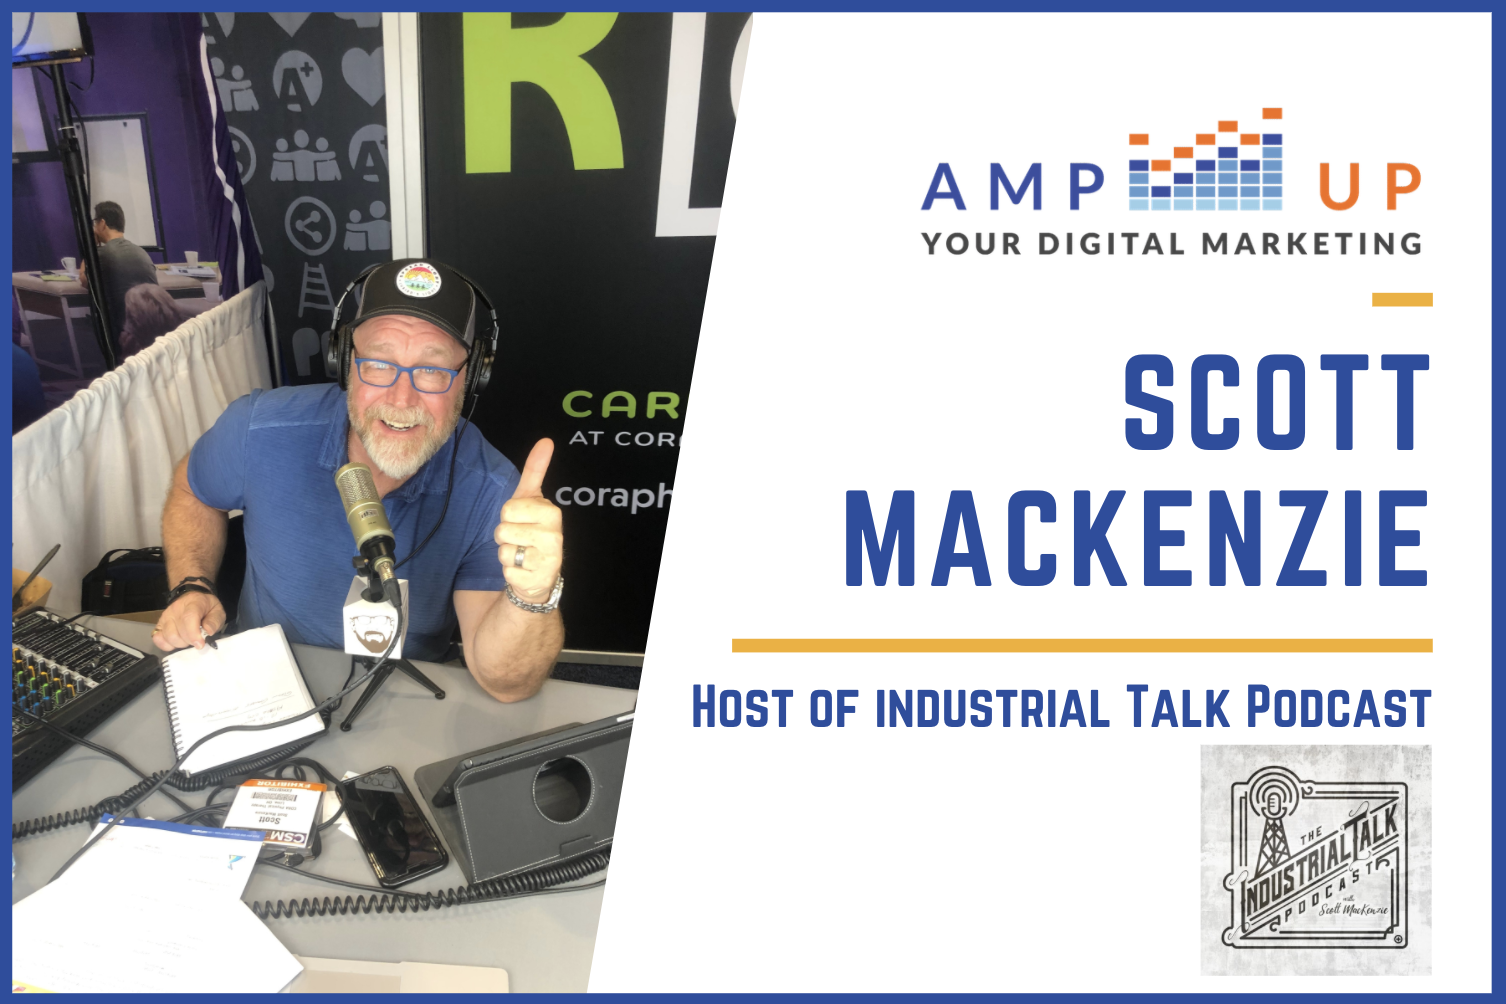 Scott Mackenzie of Industrial Talk discussing how podcasts can increase sales